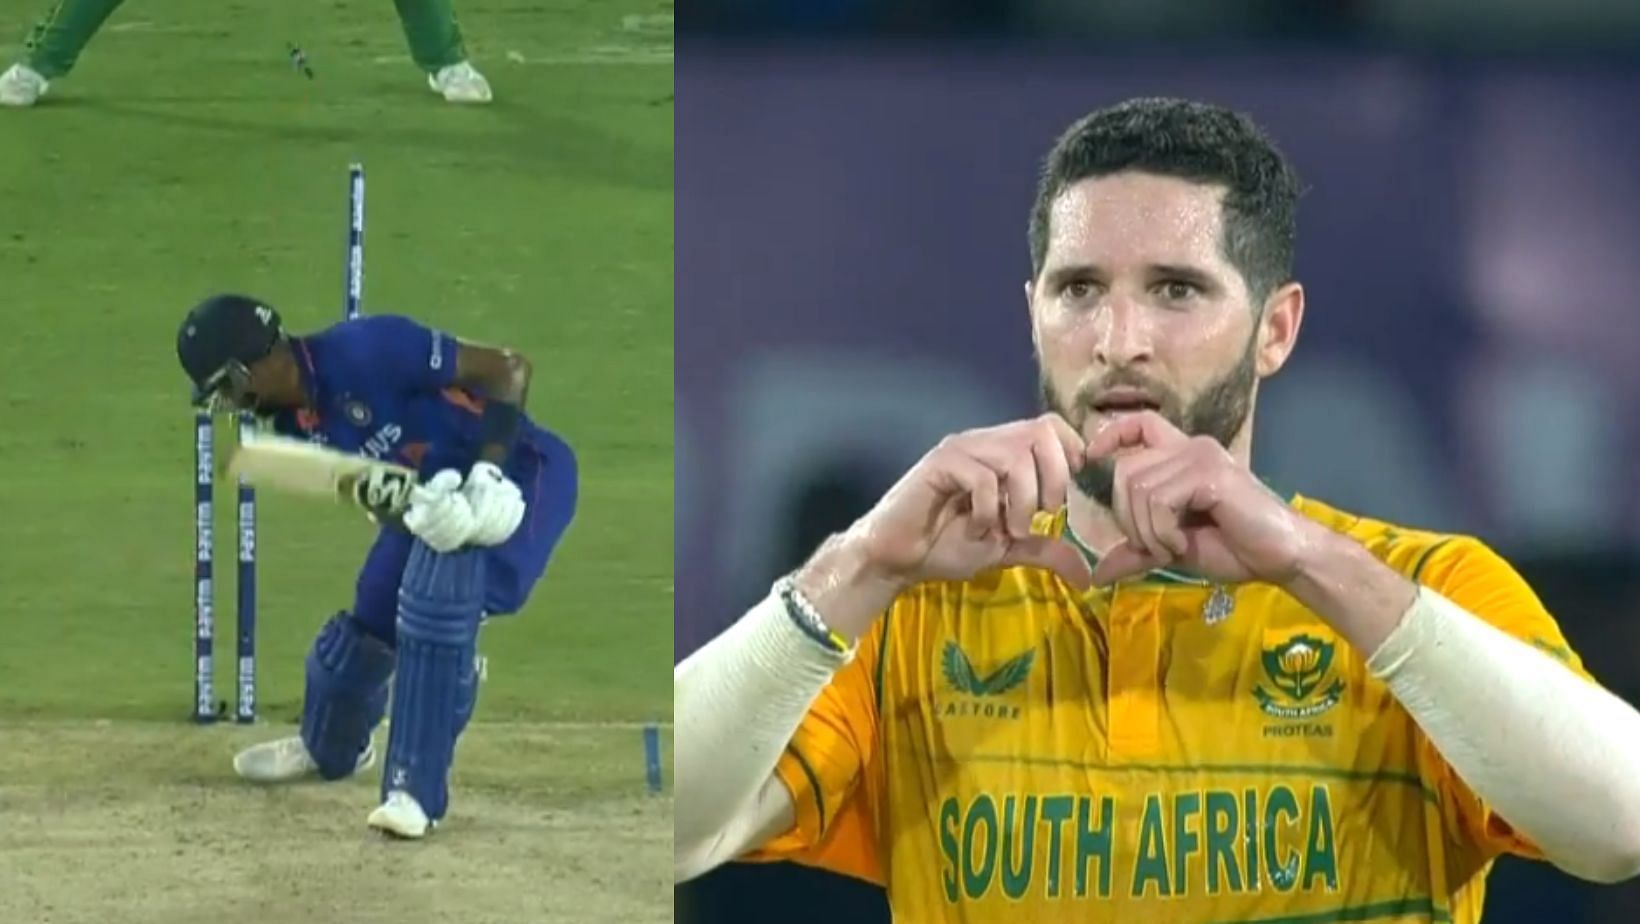 [Watch] Wayne Parnell's 'hearty' send-off to Hardik Pandya after stunning clean-bowl